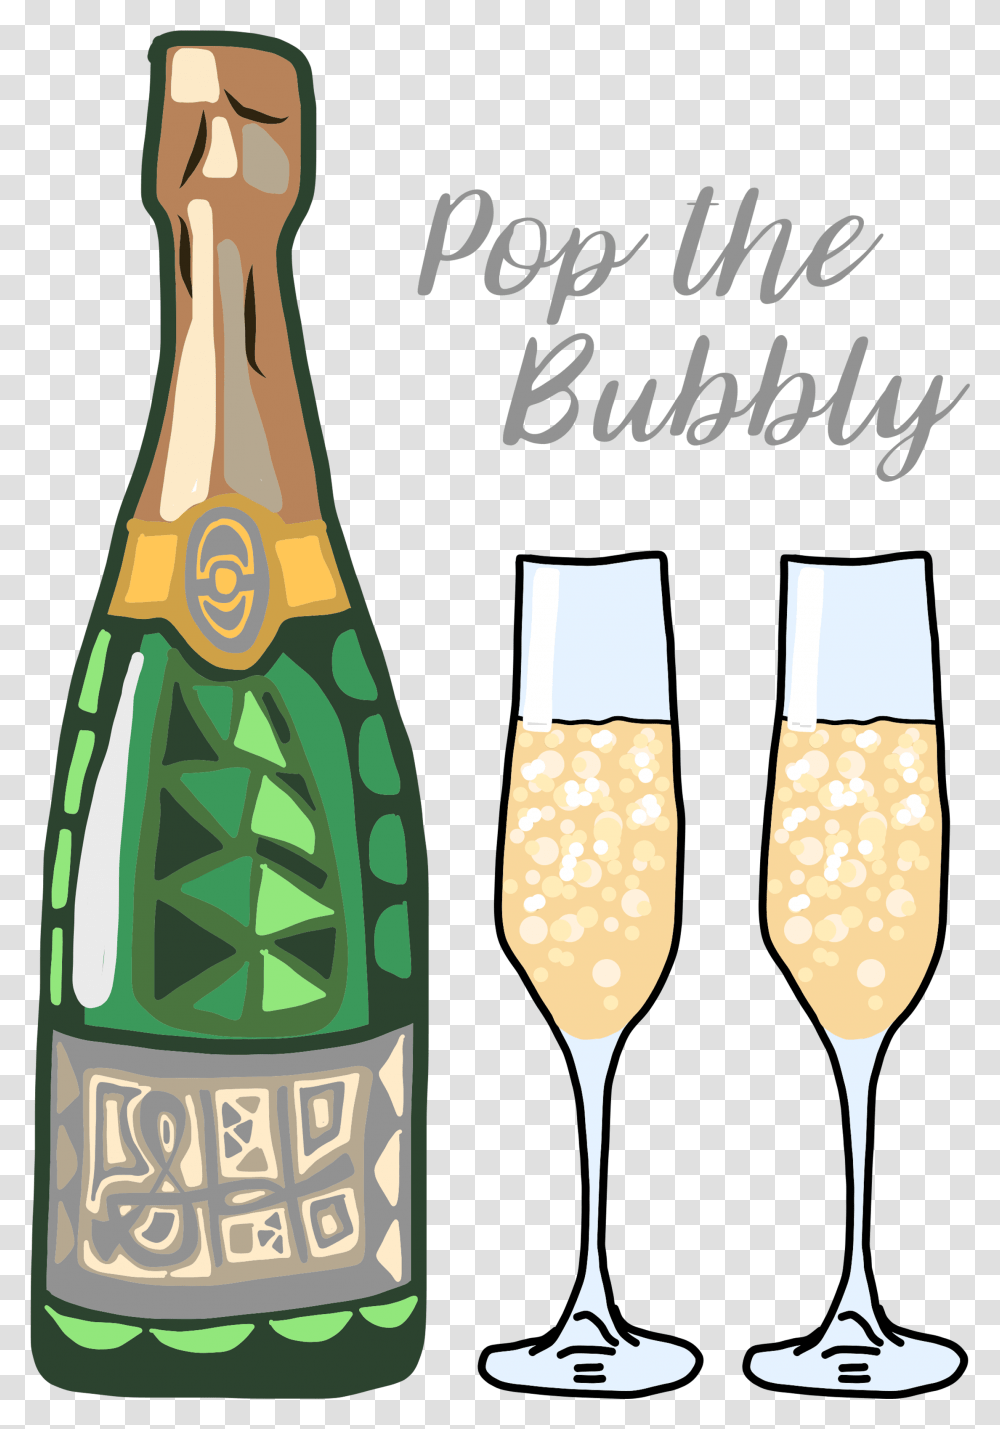 Pop The Bubbly Champagne Drawing Champagne, Beverage, Label, Alcohol Transparent Png